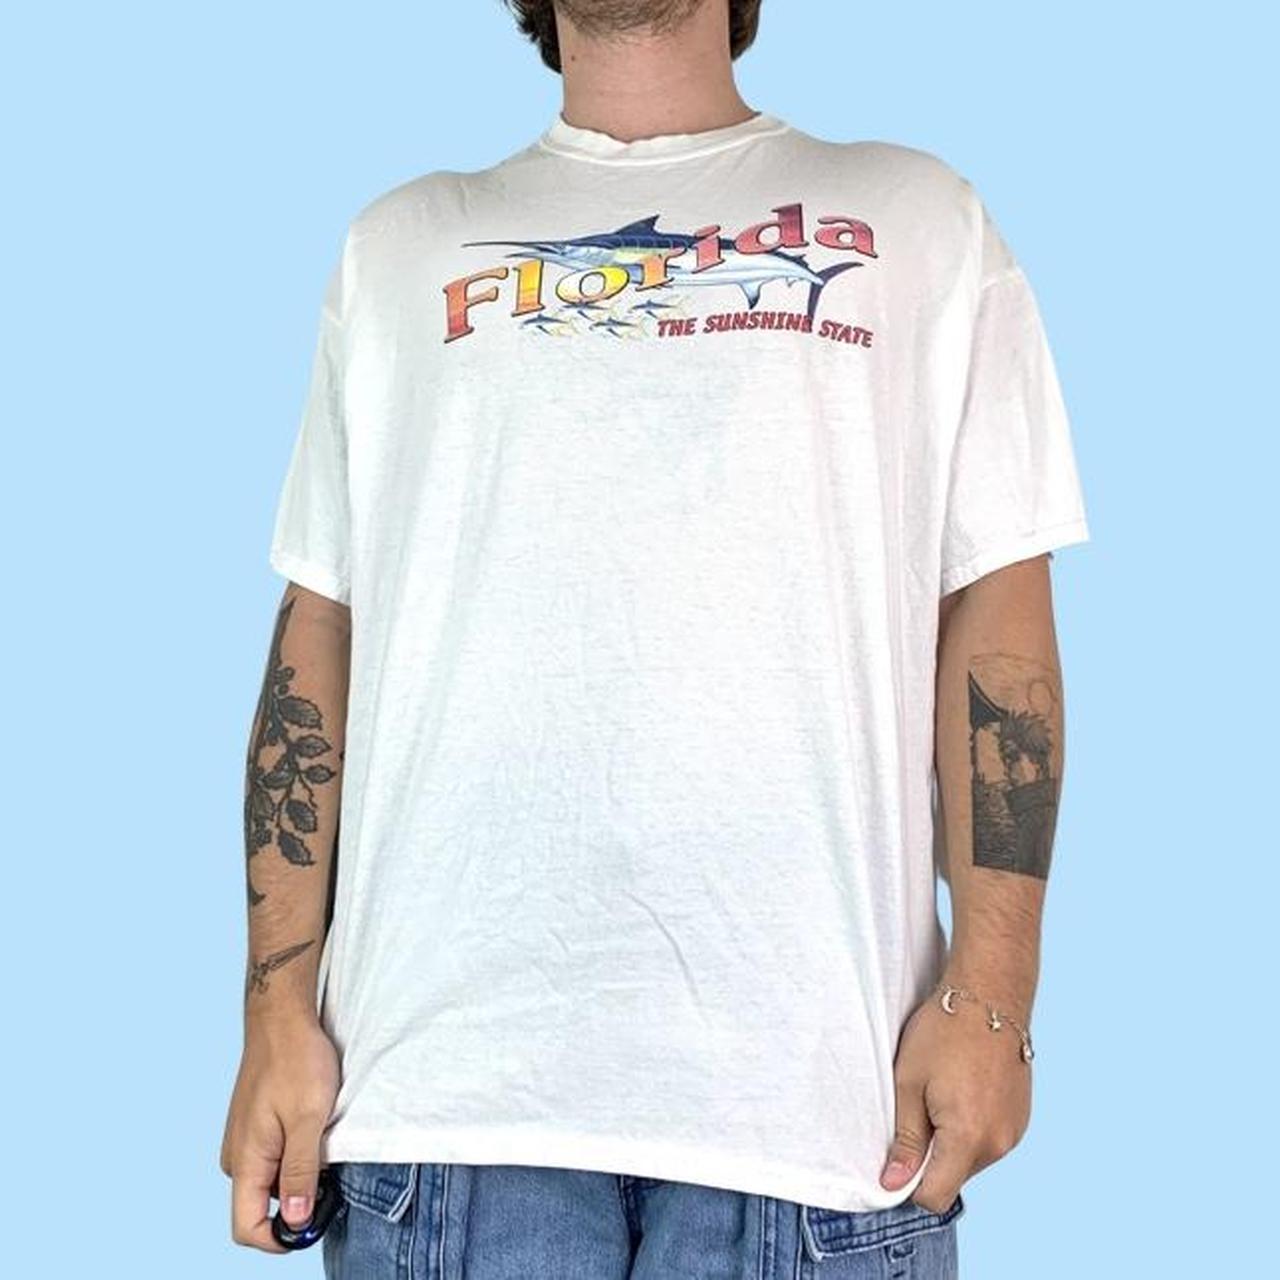 90s Florida T-shirt, Good condition, Great